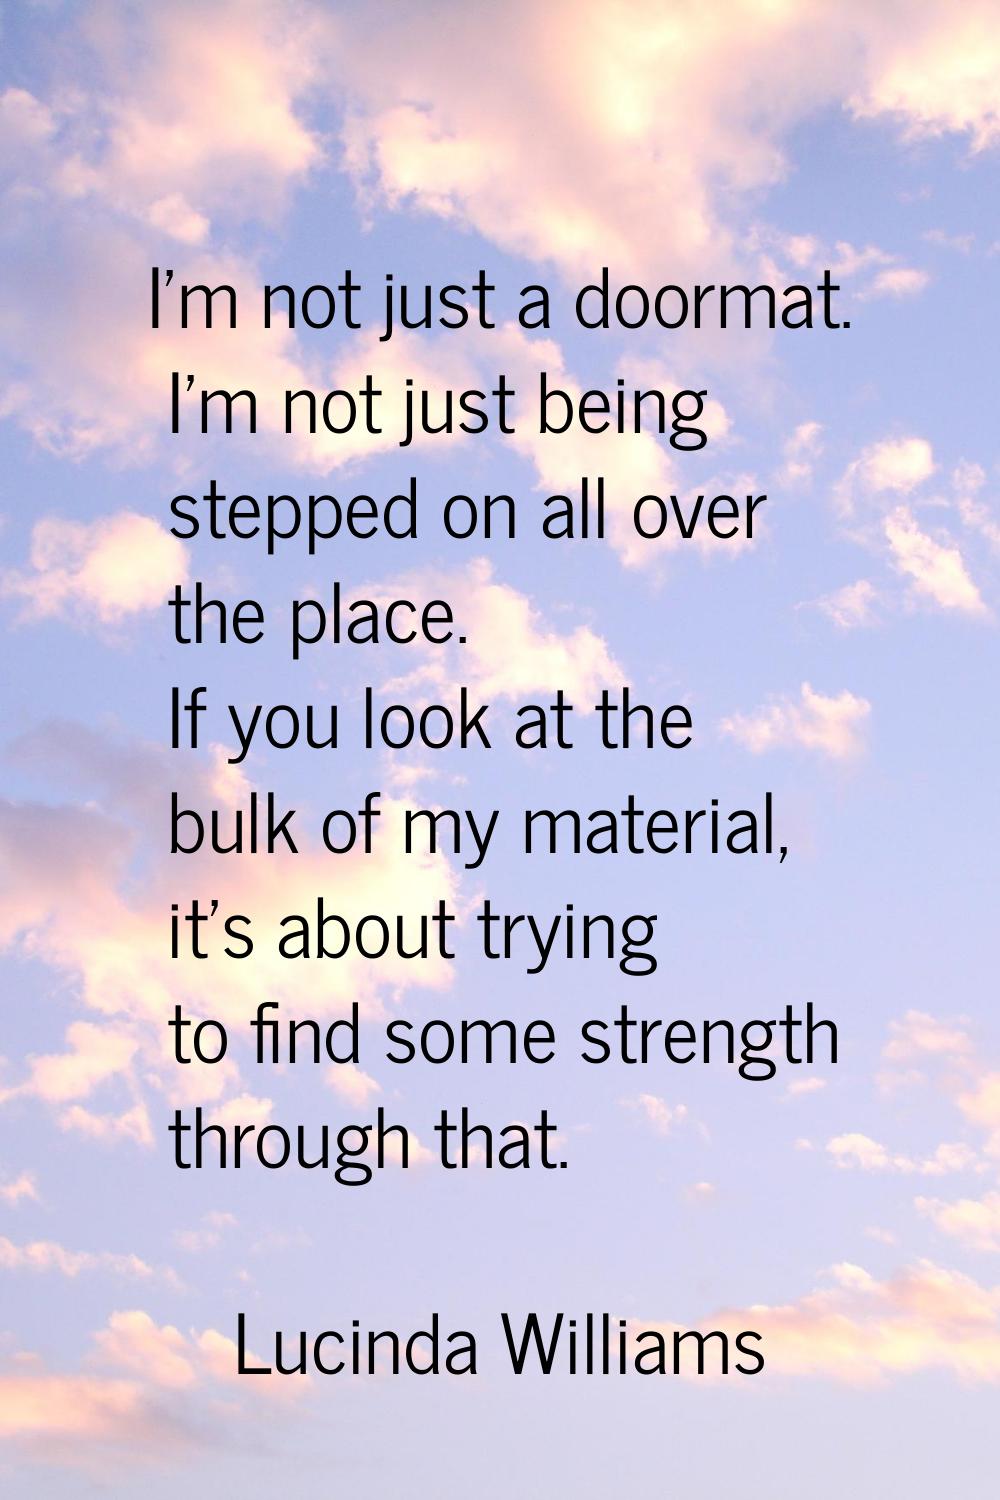 I'm not just a doormat. I'm not just being stepped on all over the place. If you look at the bulk o